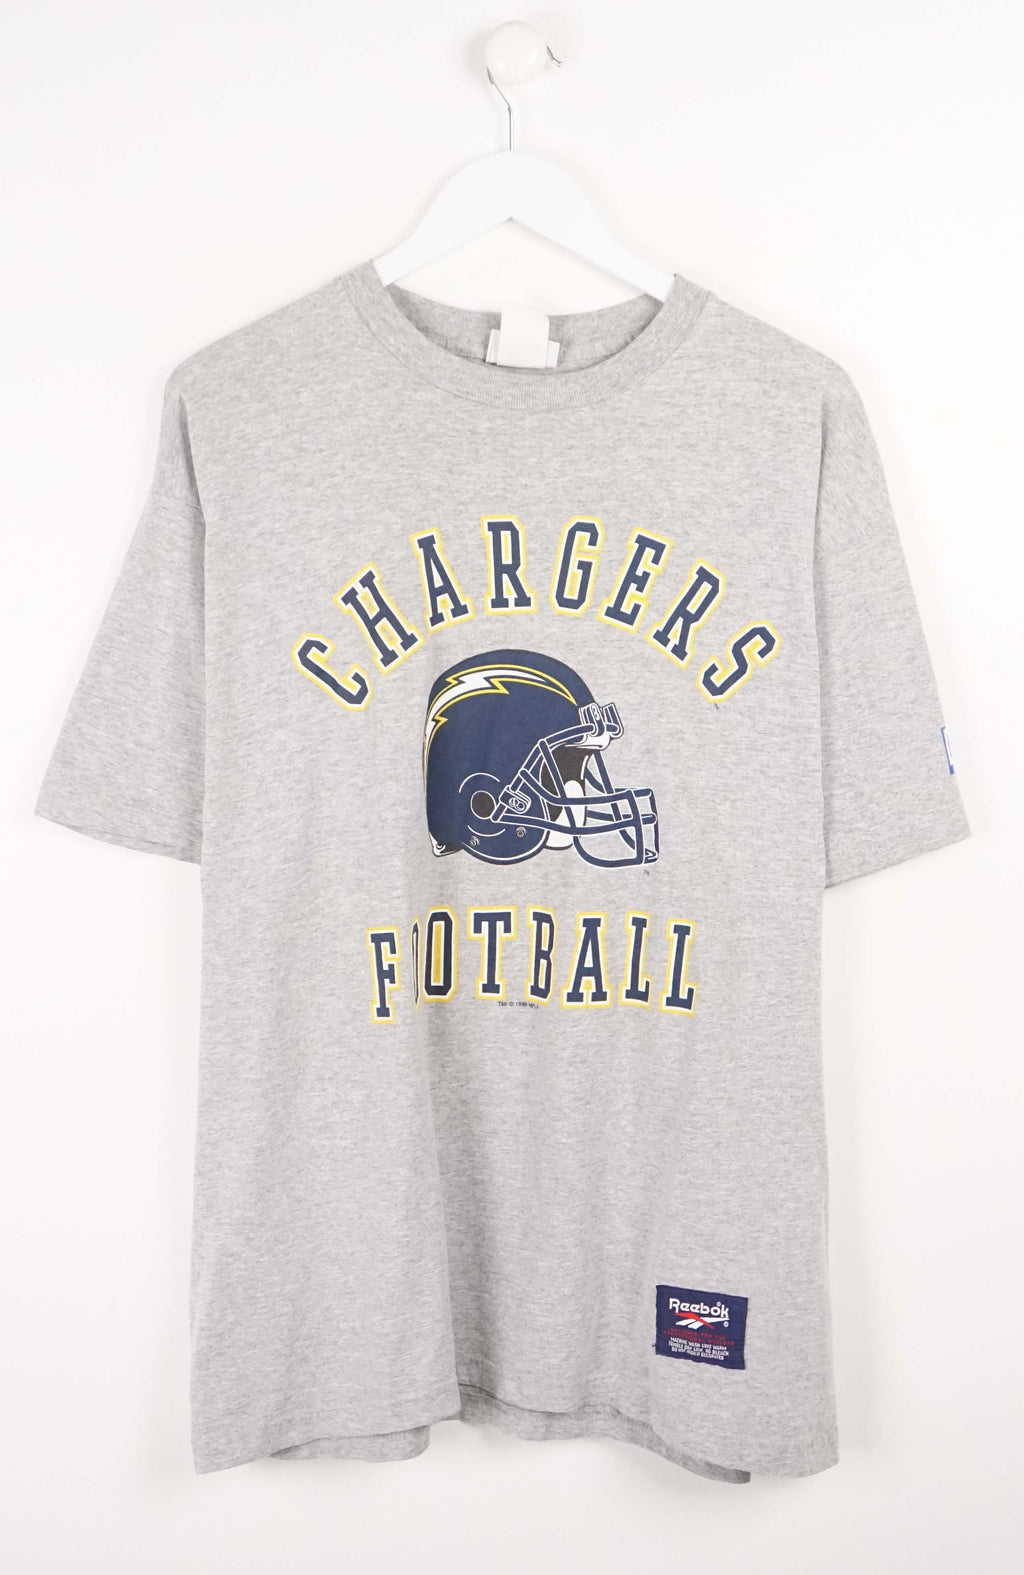 VINTAGE SAN DIEGO CHARGERS T-SHIRT (XL)